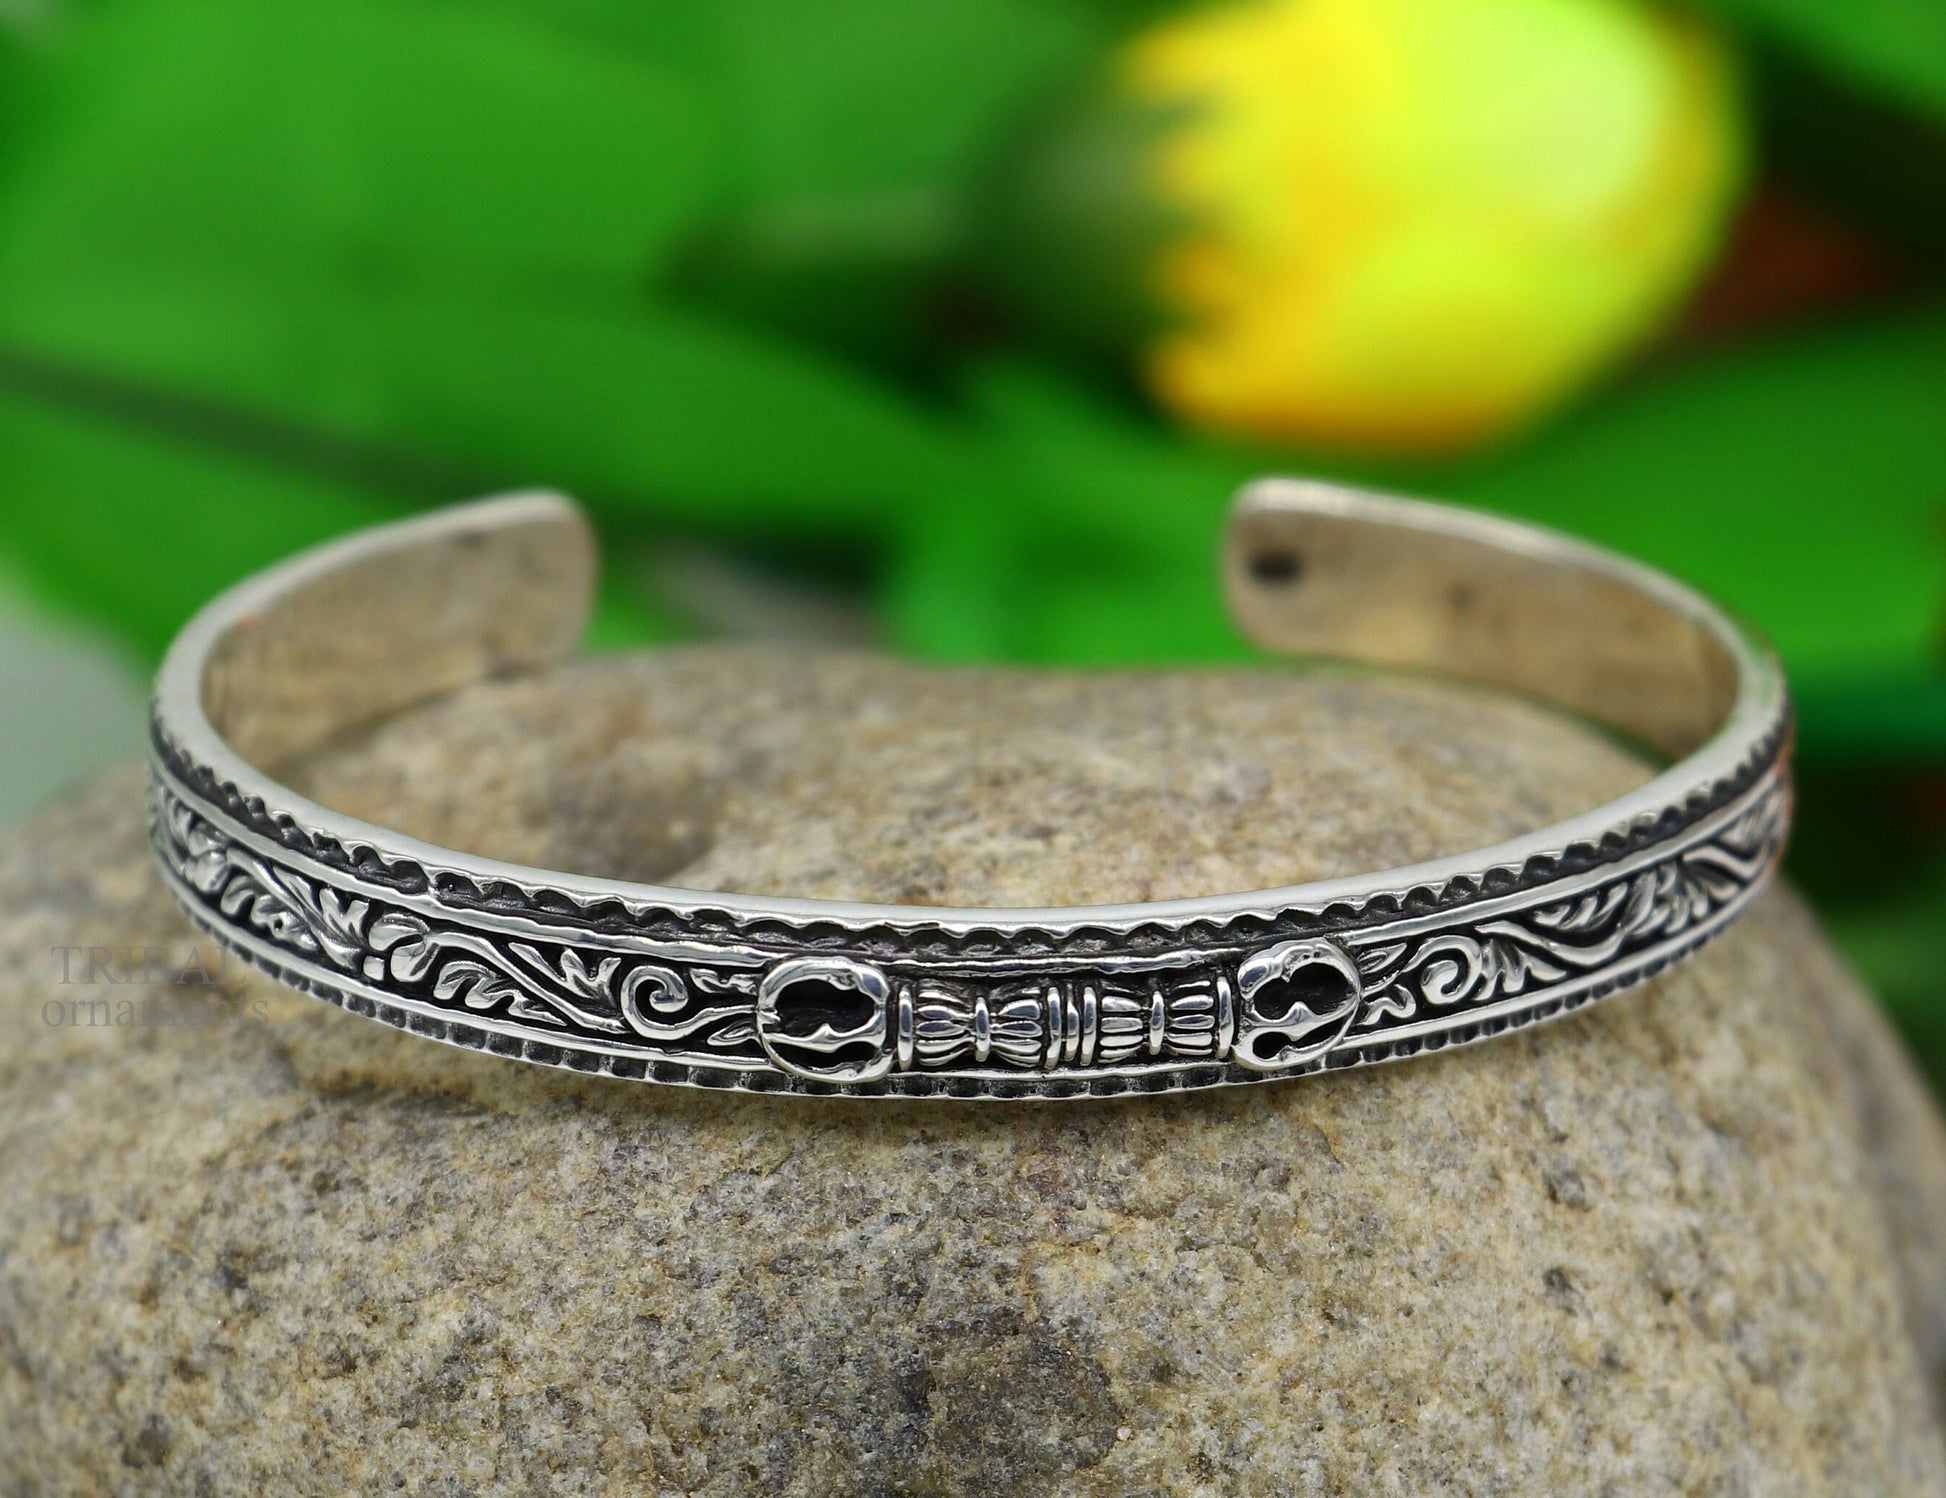 925 sterling silver or Gold polished handmade vintage design Divine Bangle cuff bracelet kada, best unisex tribal gifting jewelry Gcuff115 - TRIBAL ORNAMENTS